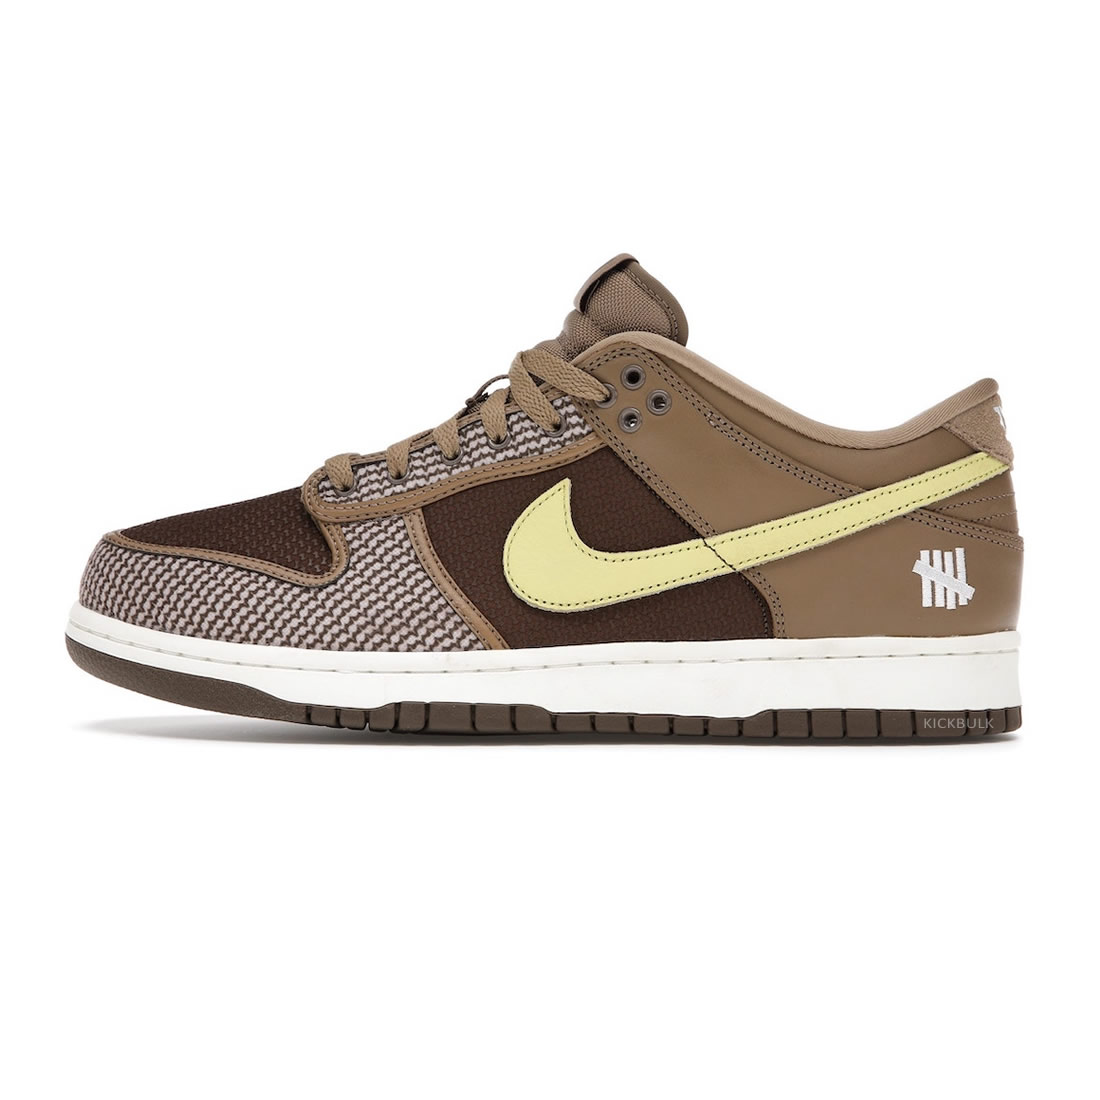 Undefeated Nike Dunk Low Sp Canteen Dh3061 200 1 - www.kickbulk.cc